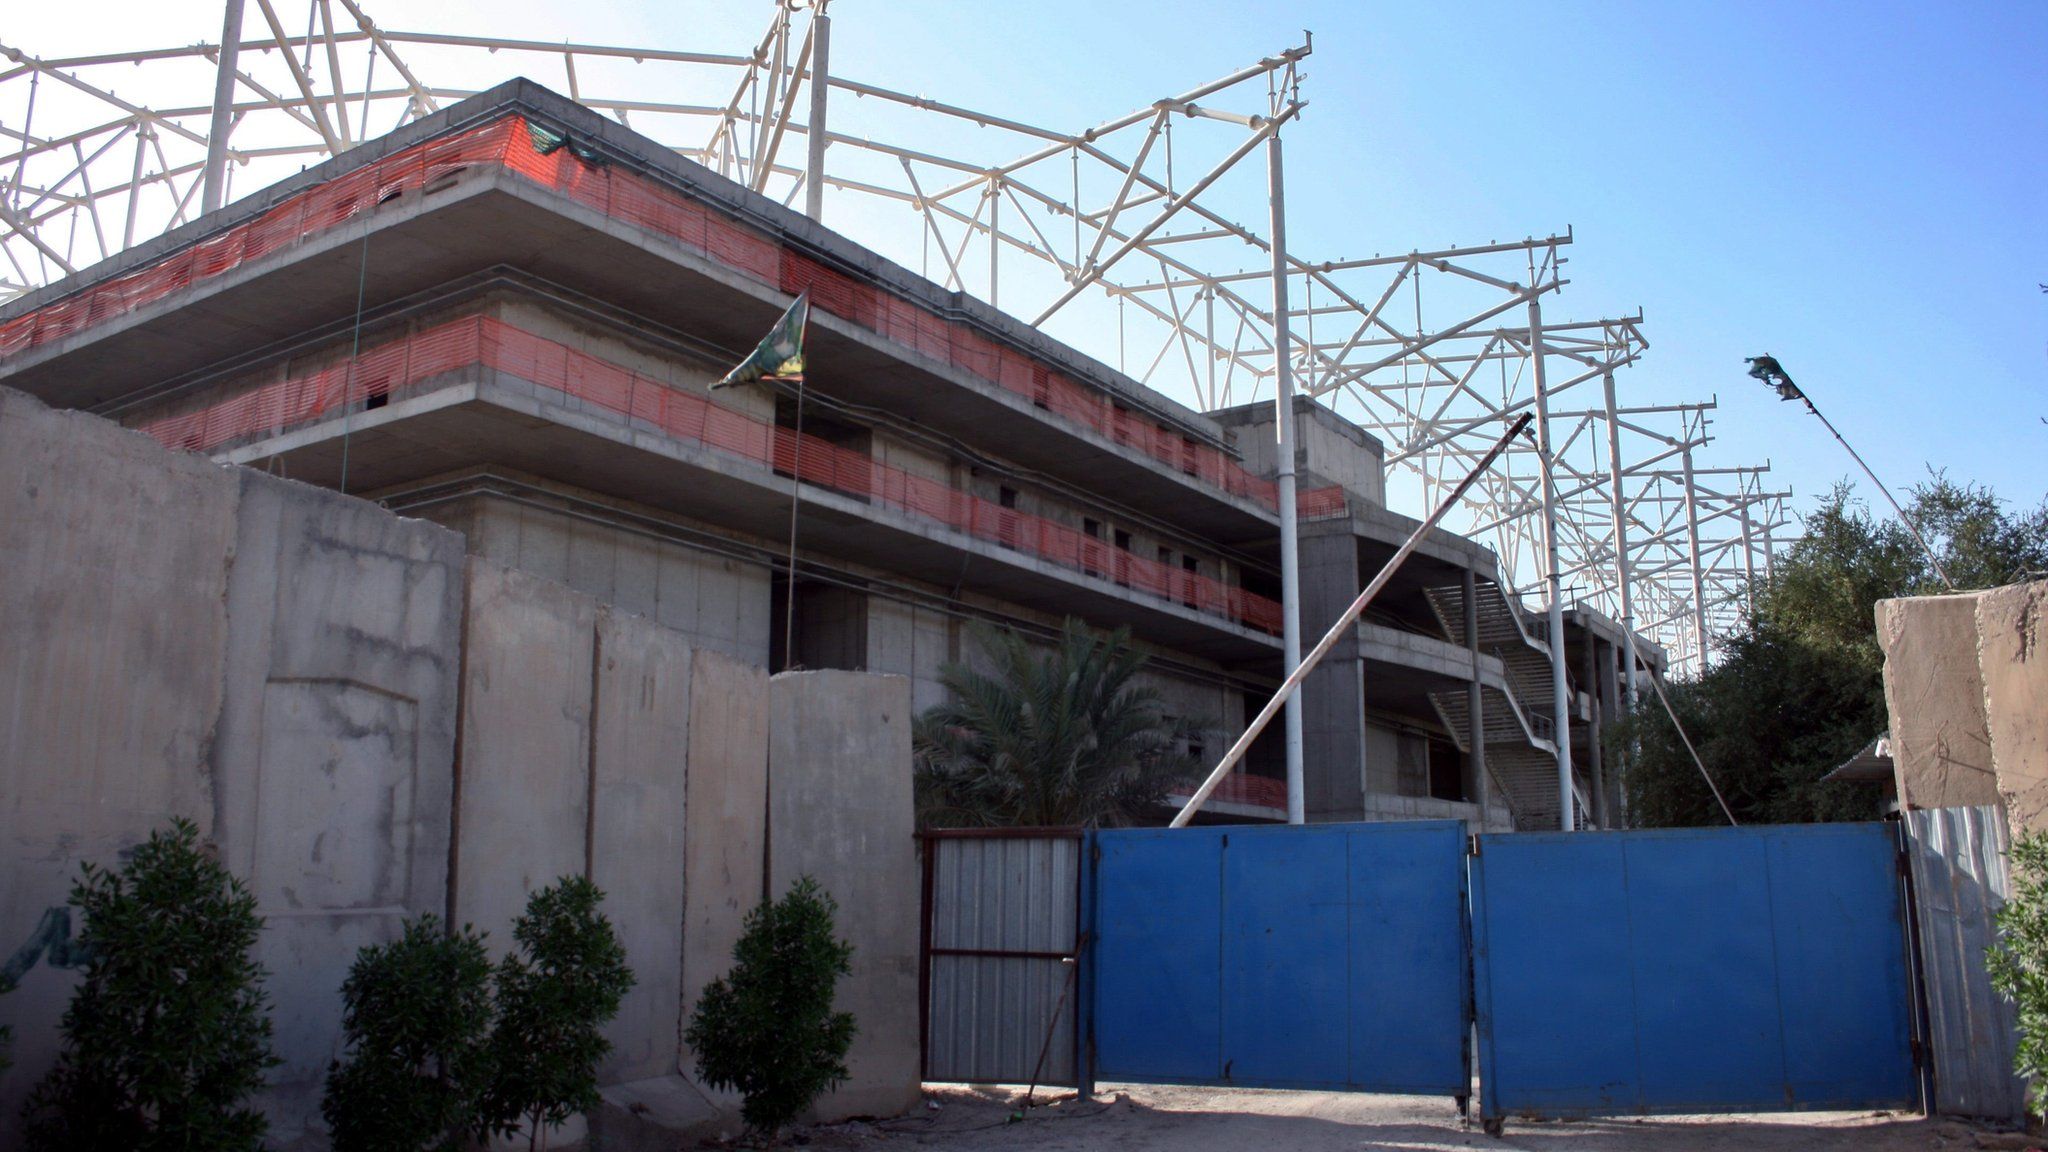 Entrance to a sports stadium under construction in Baghdad's Sadr City district (2 September 2015)